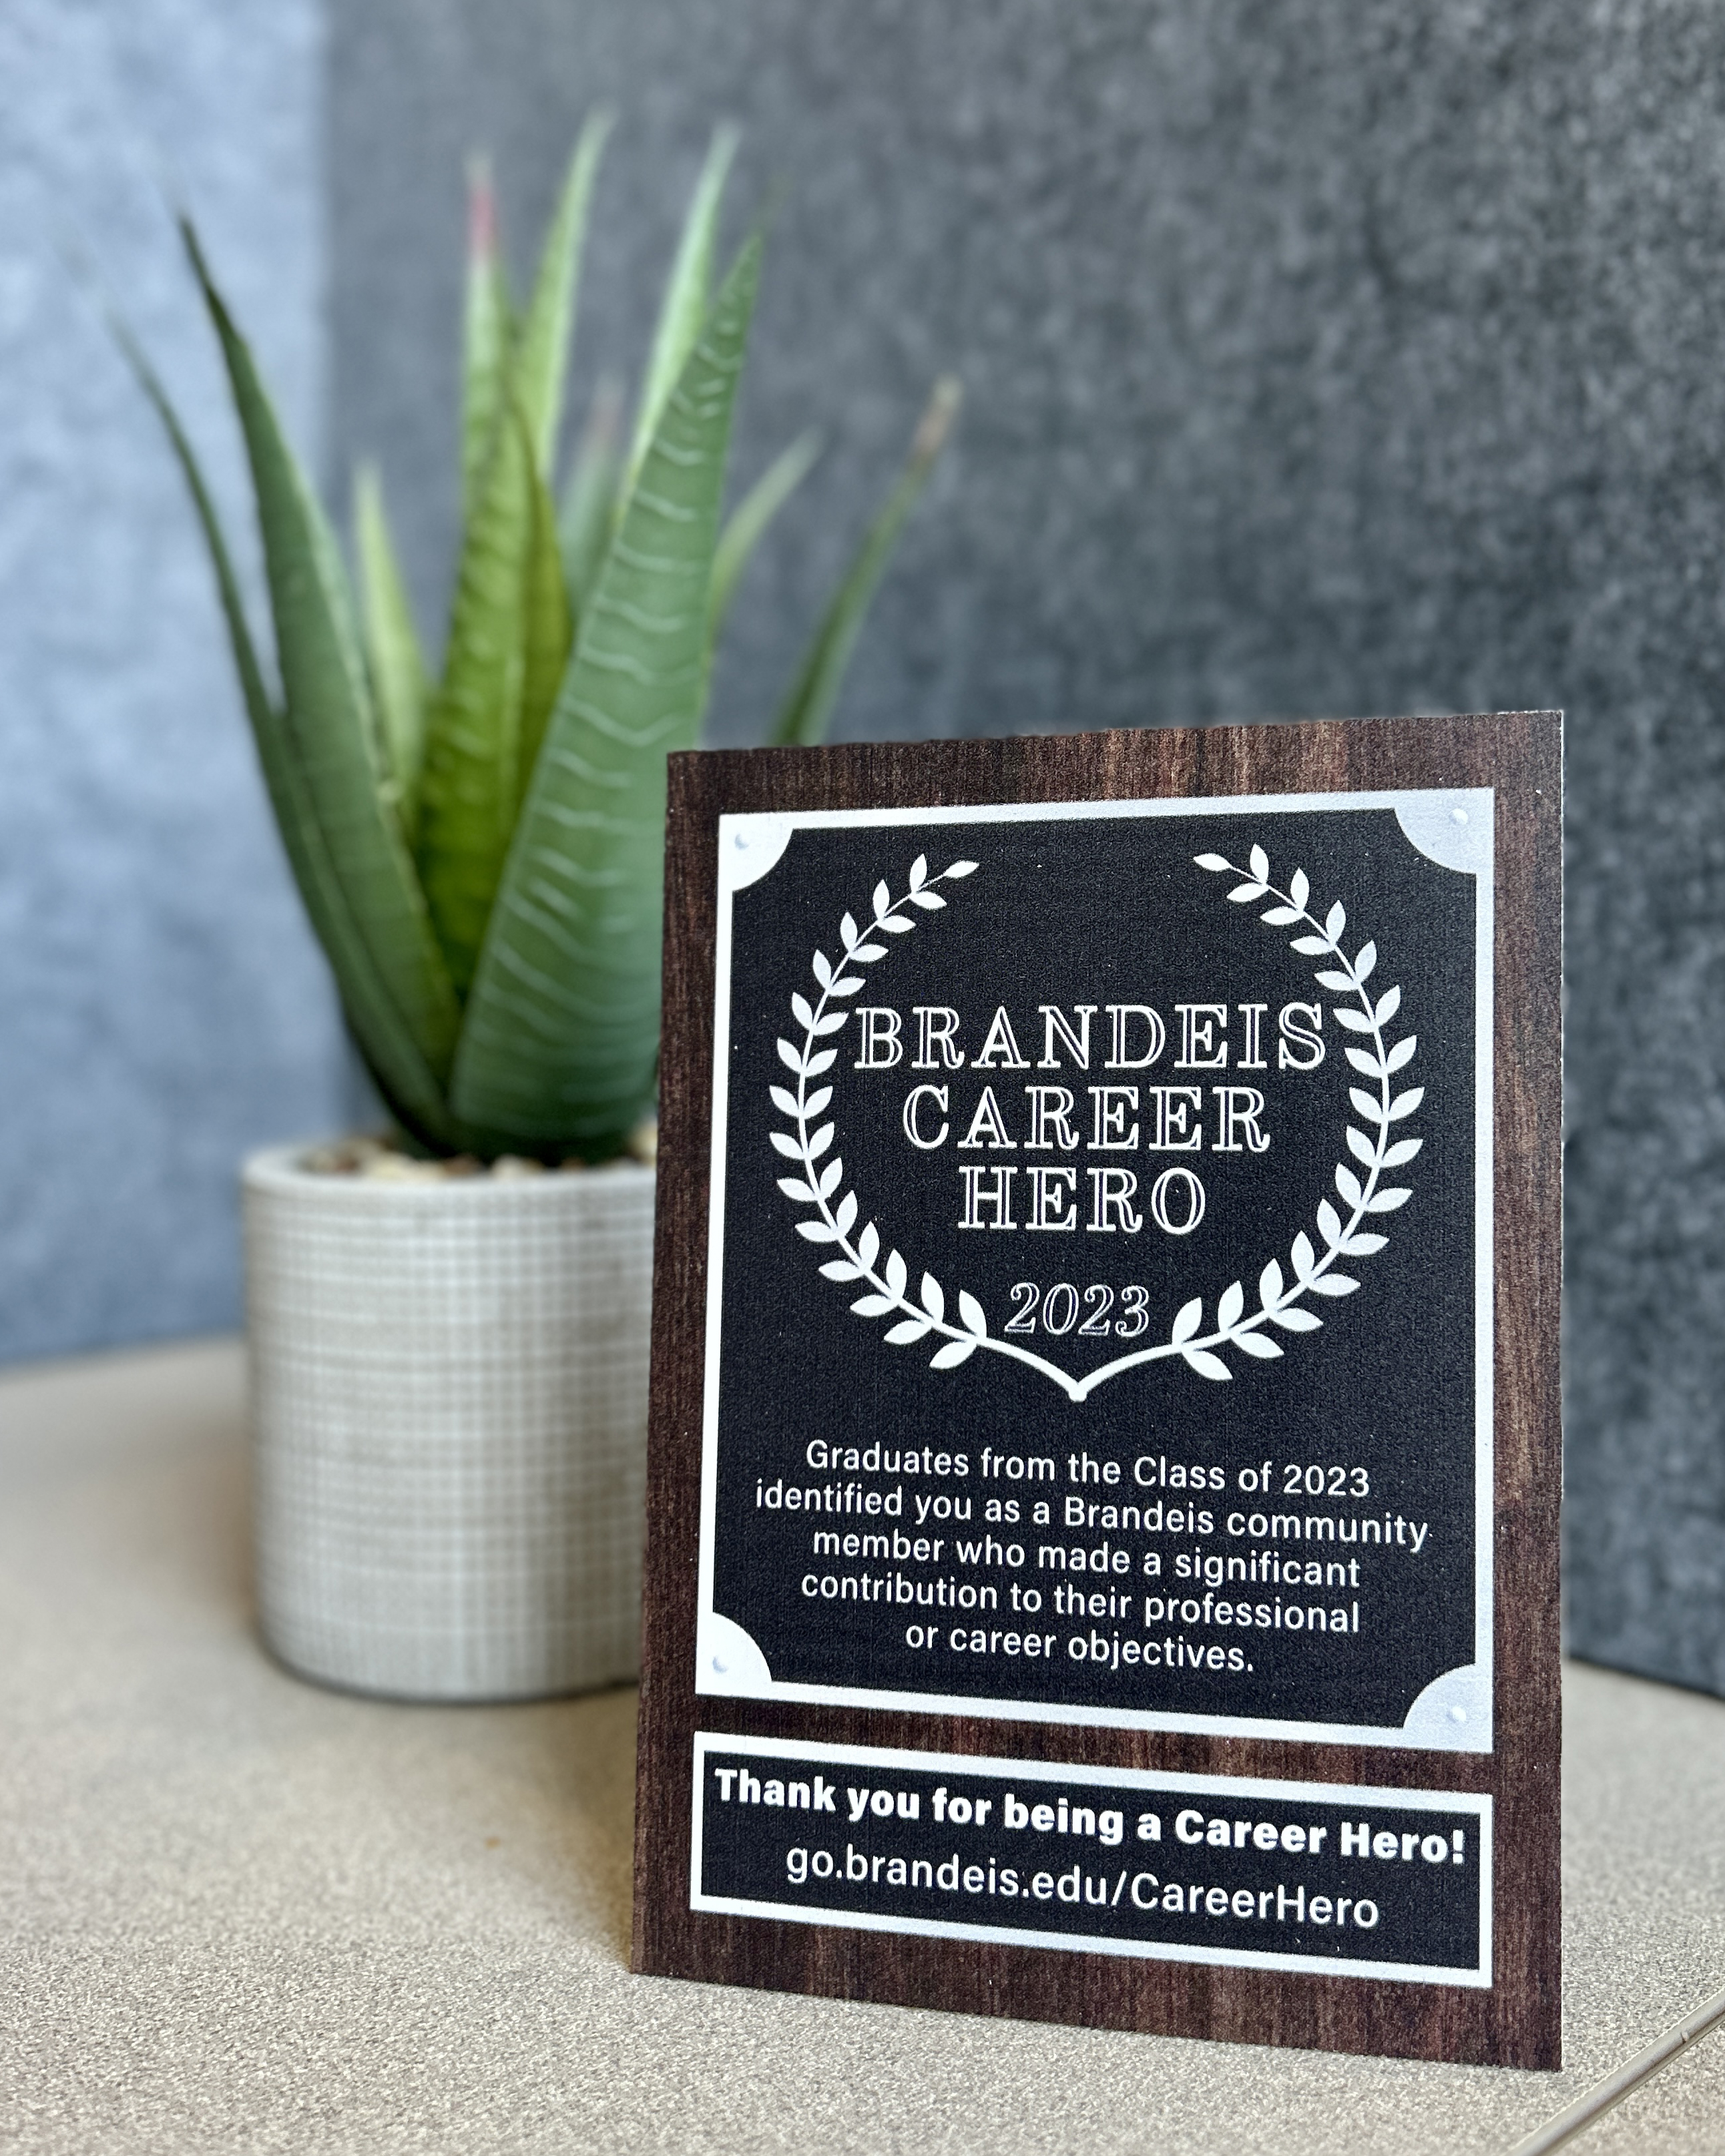 A 2023 Brandeis Career Hero award displayed on a desk next to a plant.